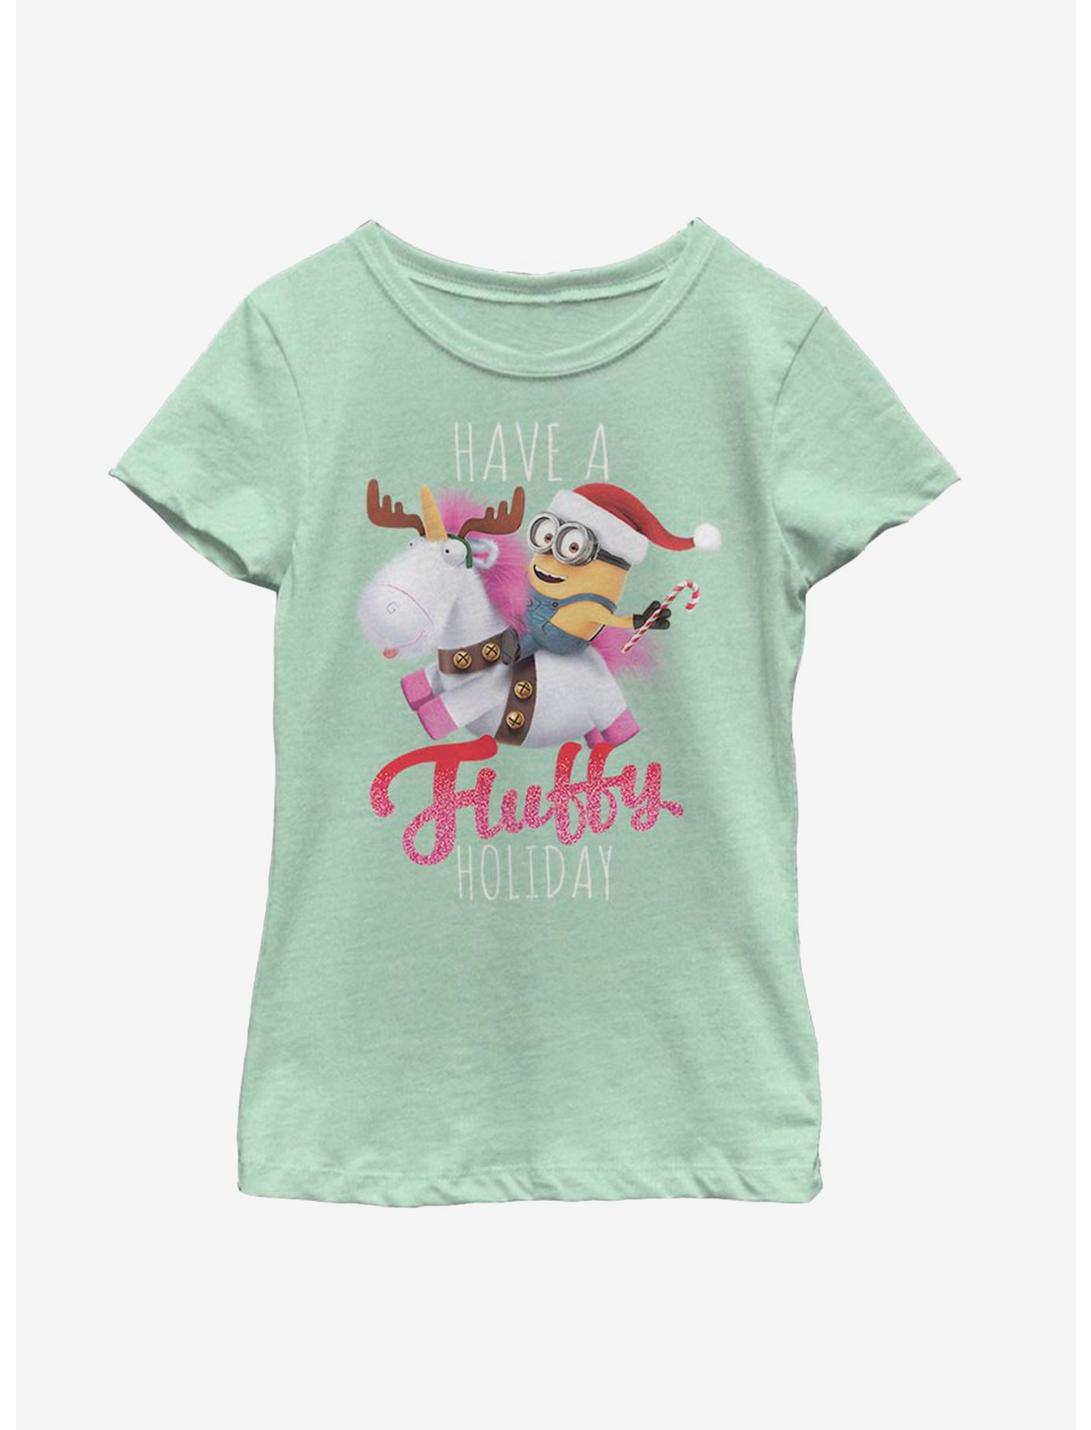 Despicable Me Minions Fluffy Holiday Youth Girls T-Shirt, MINT, hi-res